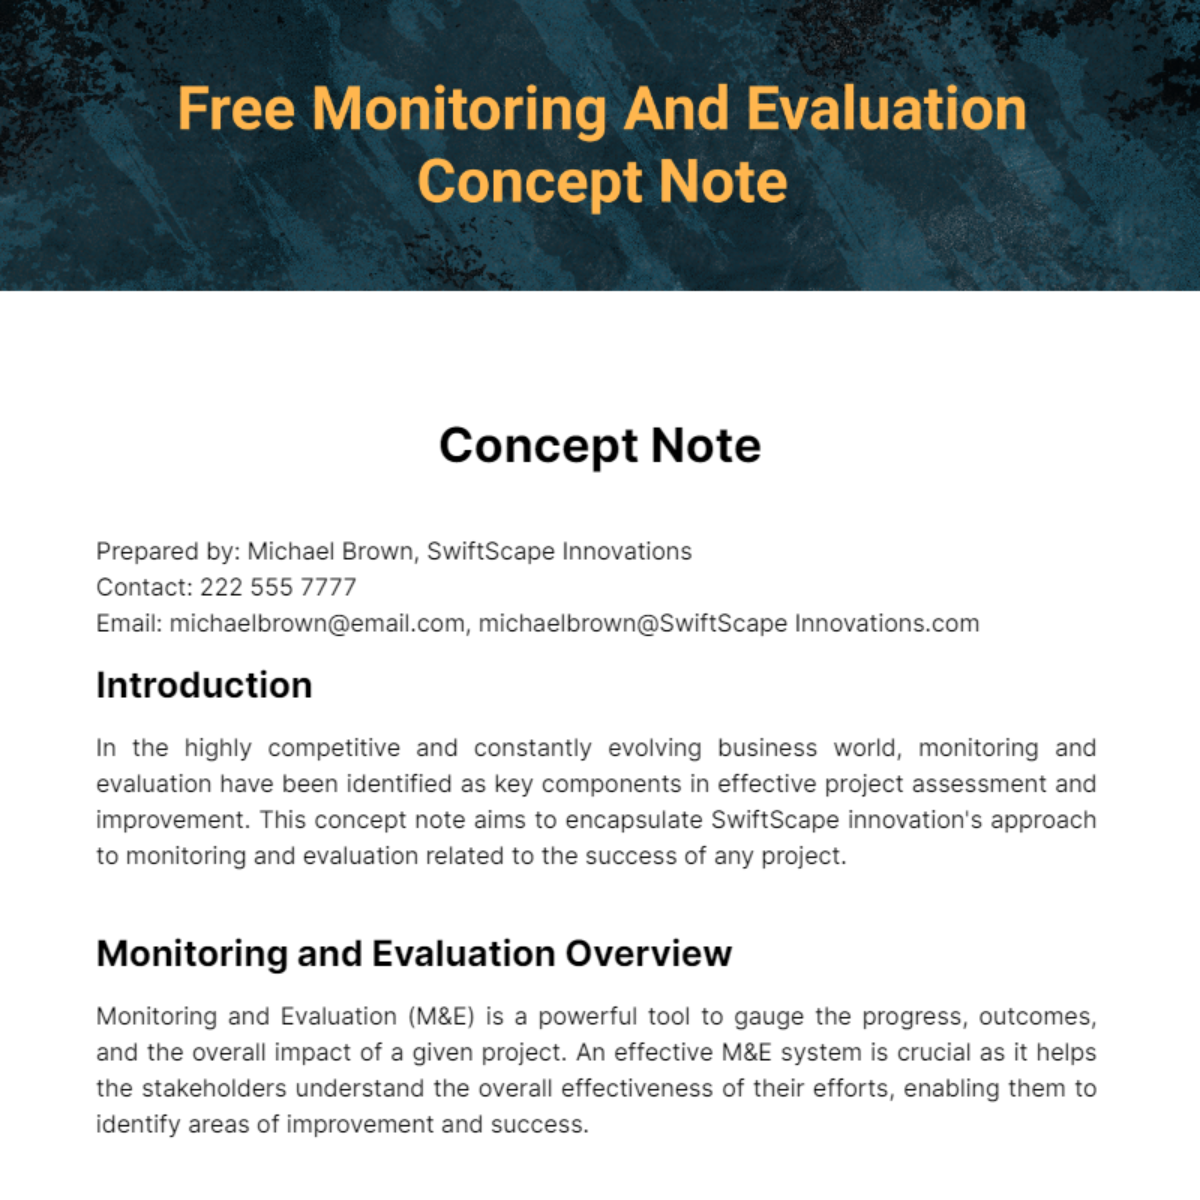 Monitoring and Evaluation Concept Note Template